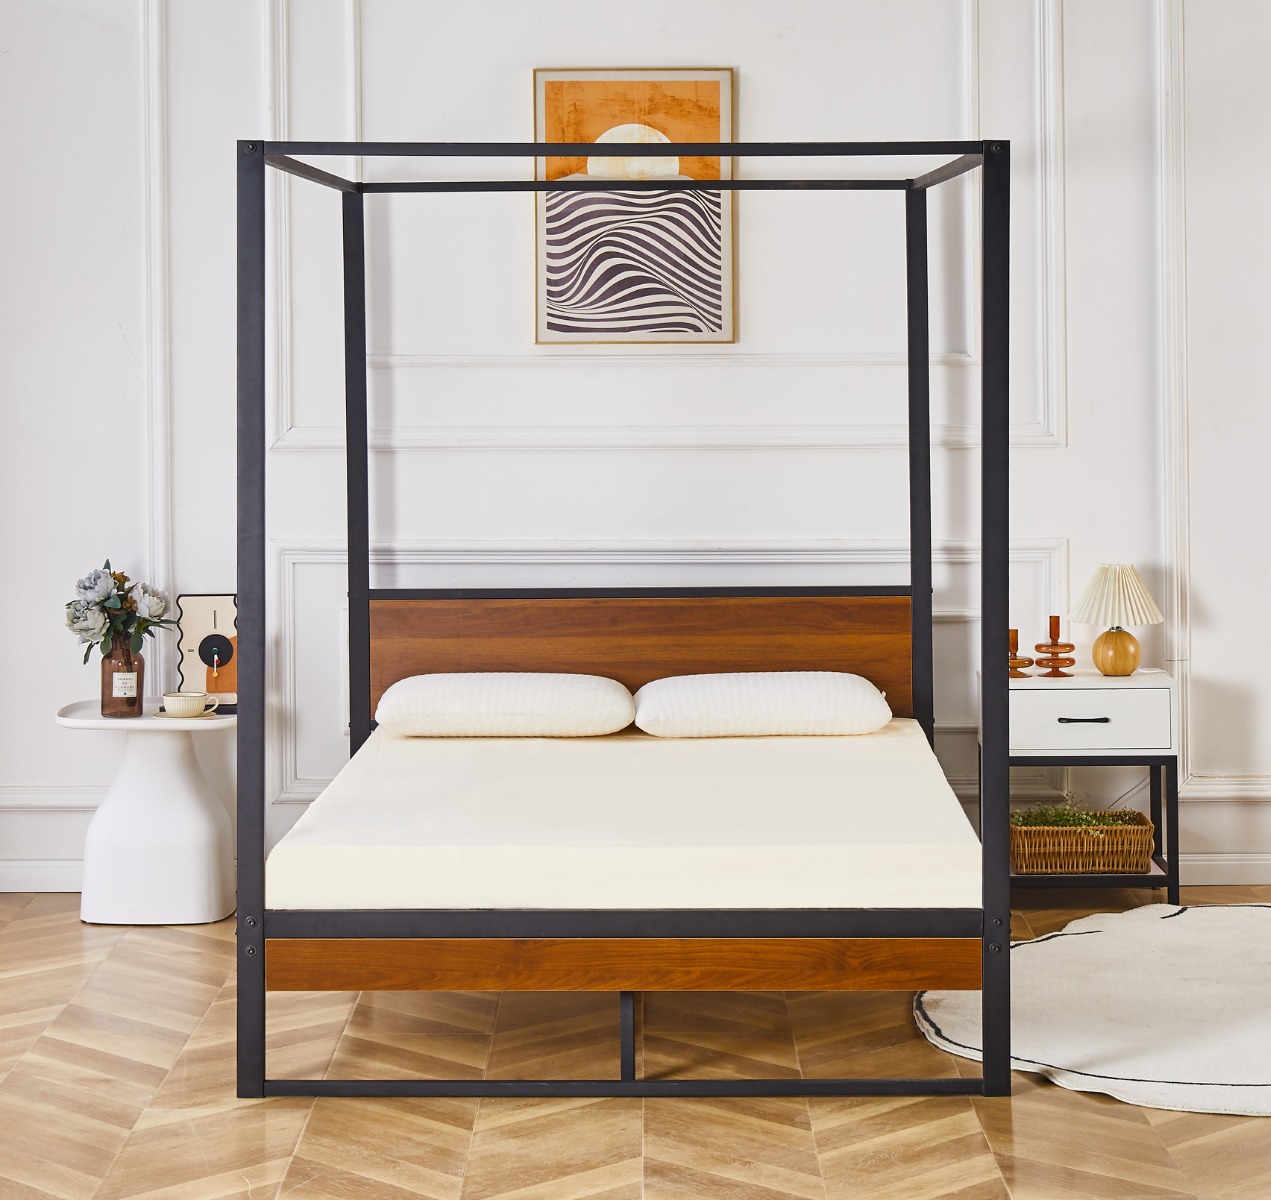 Flair Rockford Wooden Metal 4 Poster Bed Frame Small Double